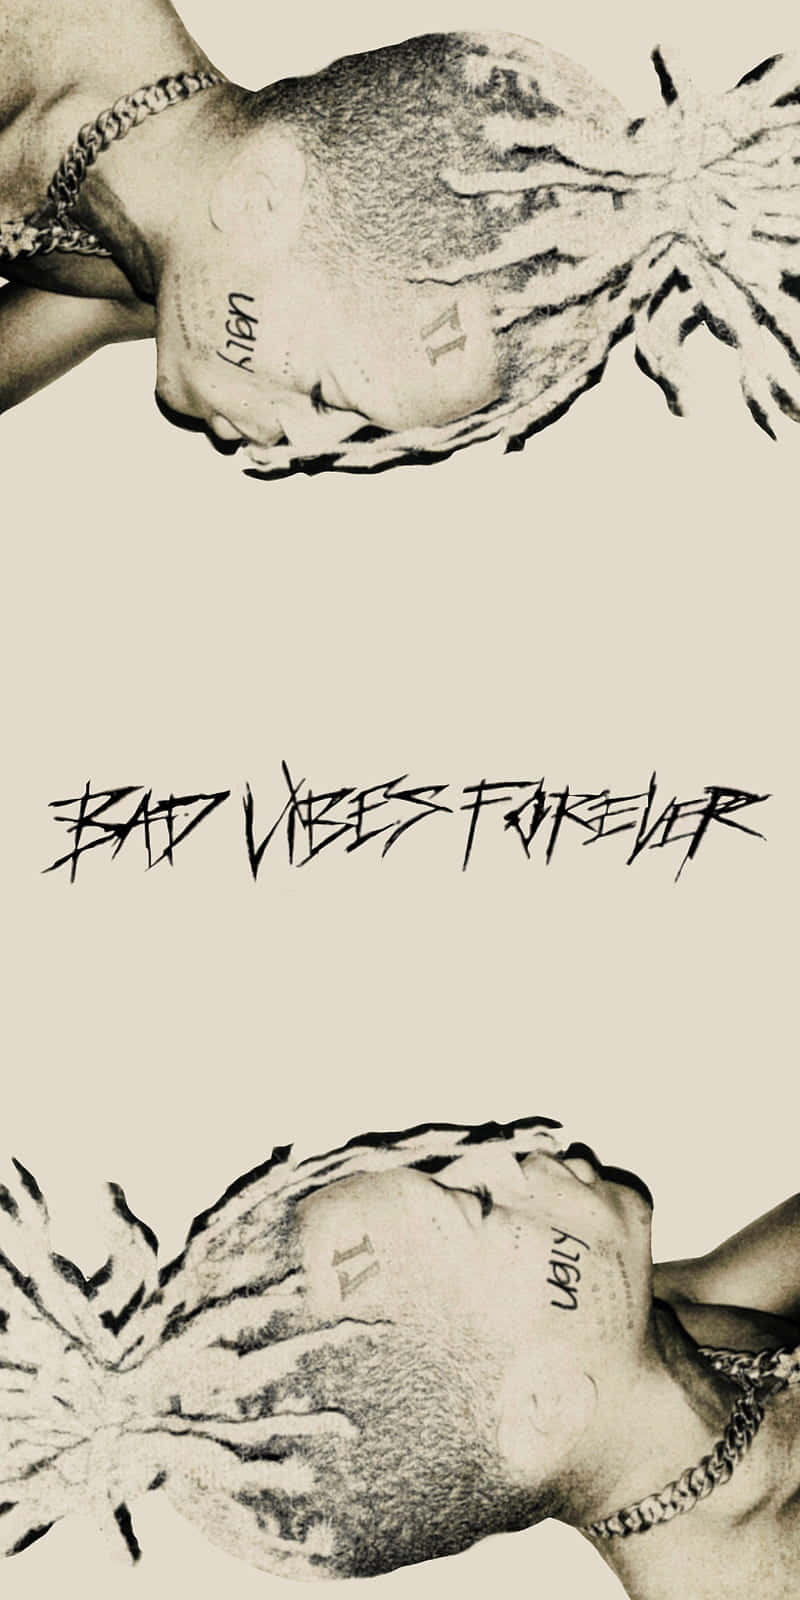 Don't let bad vibes ruin your day Wallpaper